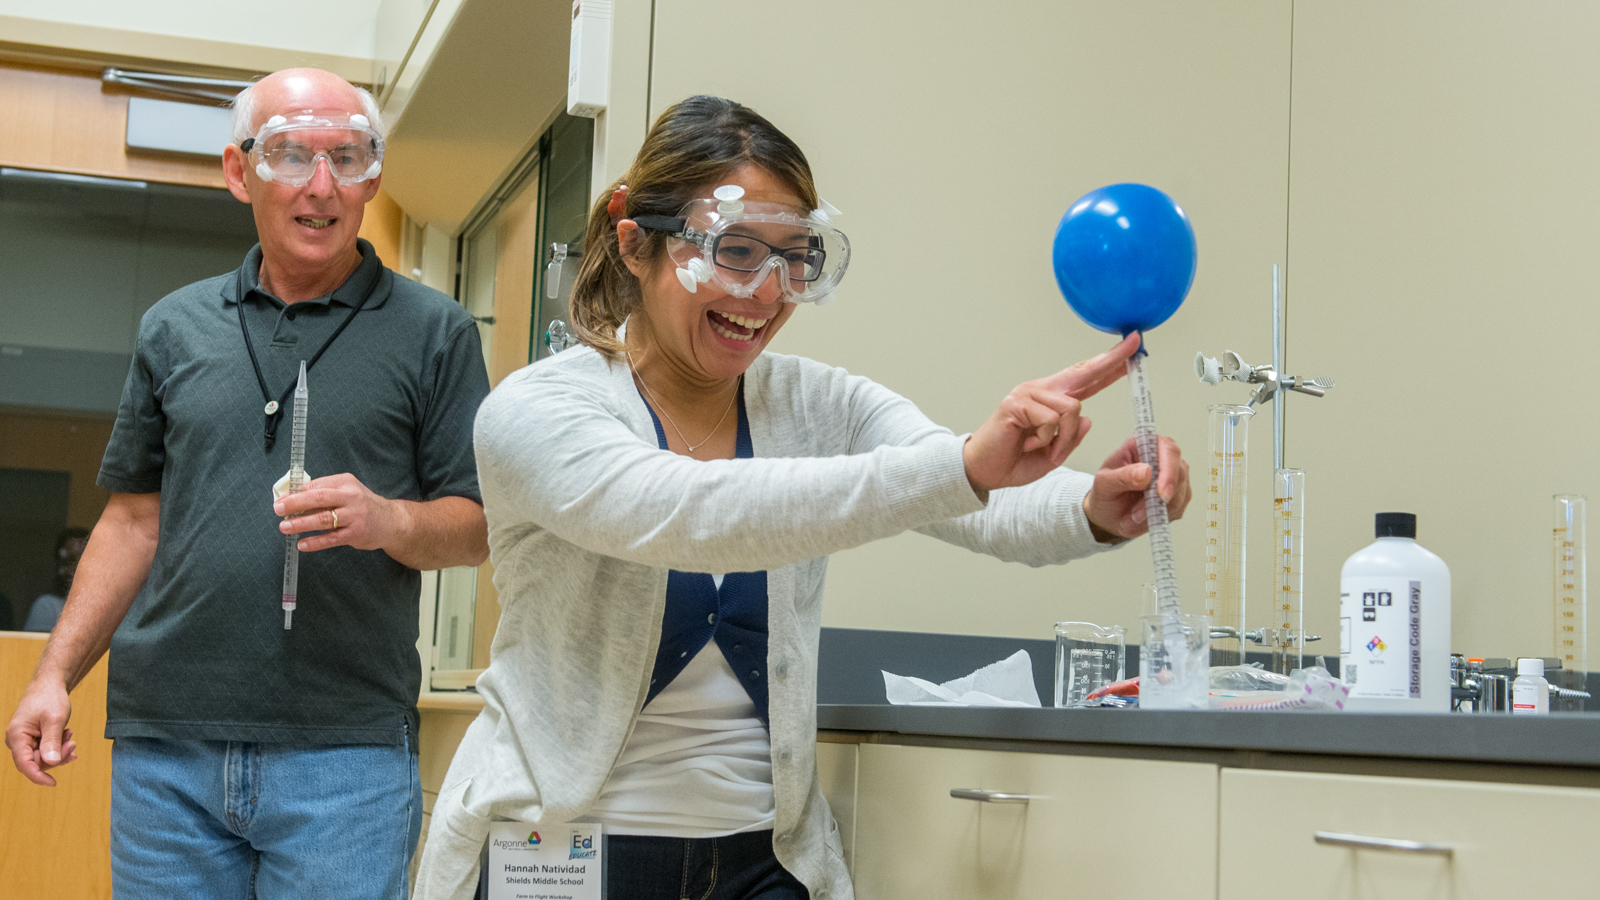 Argonne’s Deon Ettinger shows Shields Middle School teacher Hannah N. how the air she exhaled into the balloon reacts with the calcium hydroxide solution in the glass beaker to create calcium carbonate. The reaction, which turned a transparent solution into a chalky-colored one, is an indicator of the presence of carbon dioxide and shows when carbon-based substances (like biofuels) are used as fuel, carbon dioxide is released. Photo credit: Mark Lopez, Argonne National Laboratory.